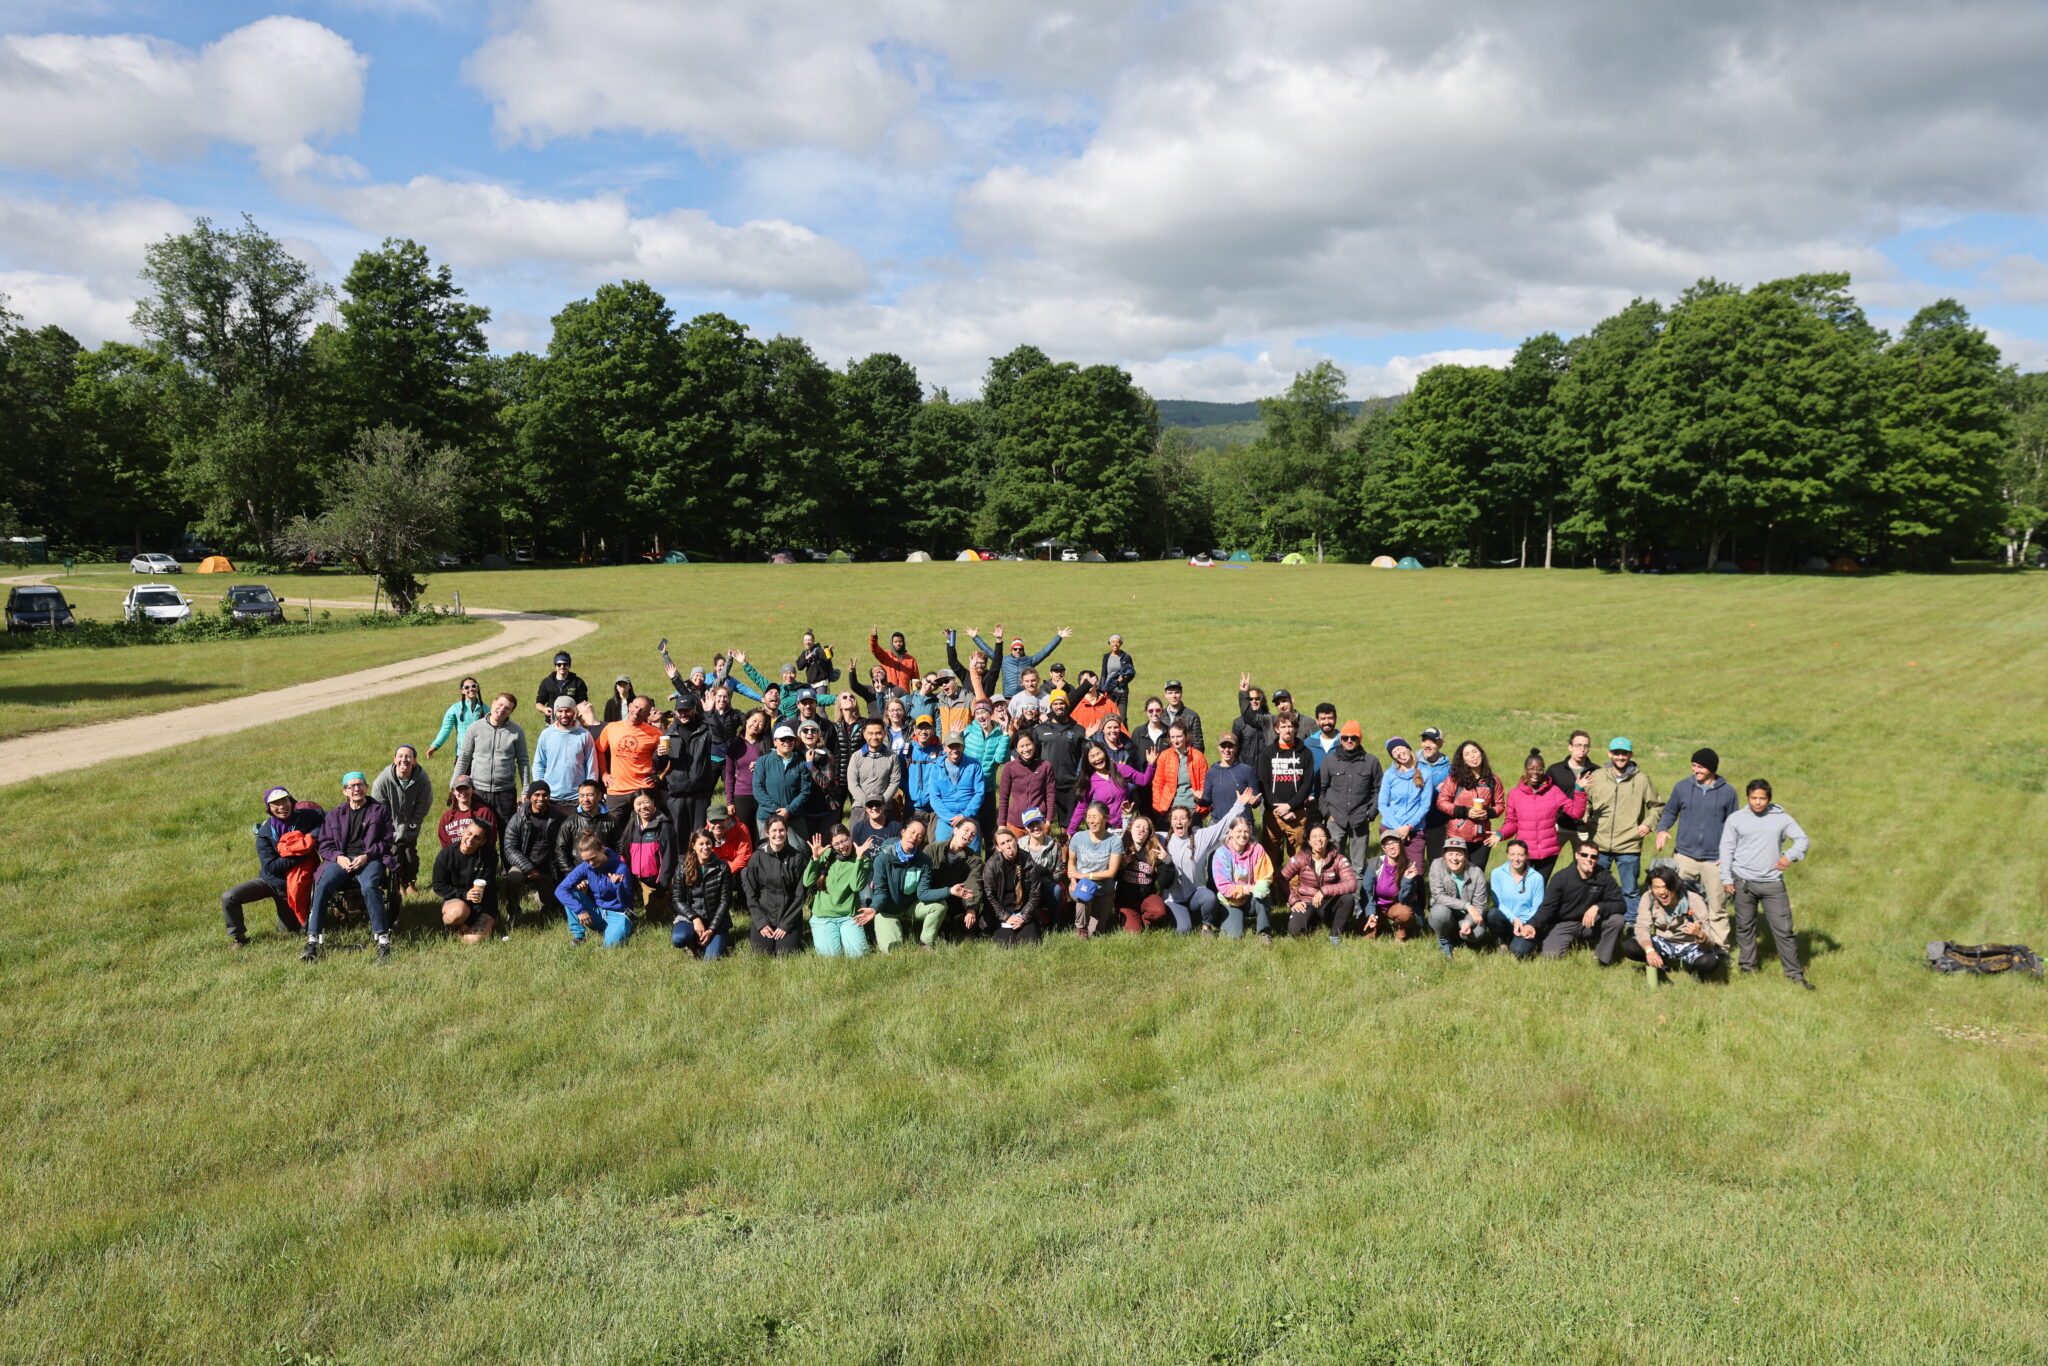 Participants of Rumney Together smile for a group photo.